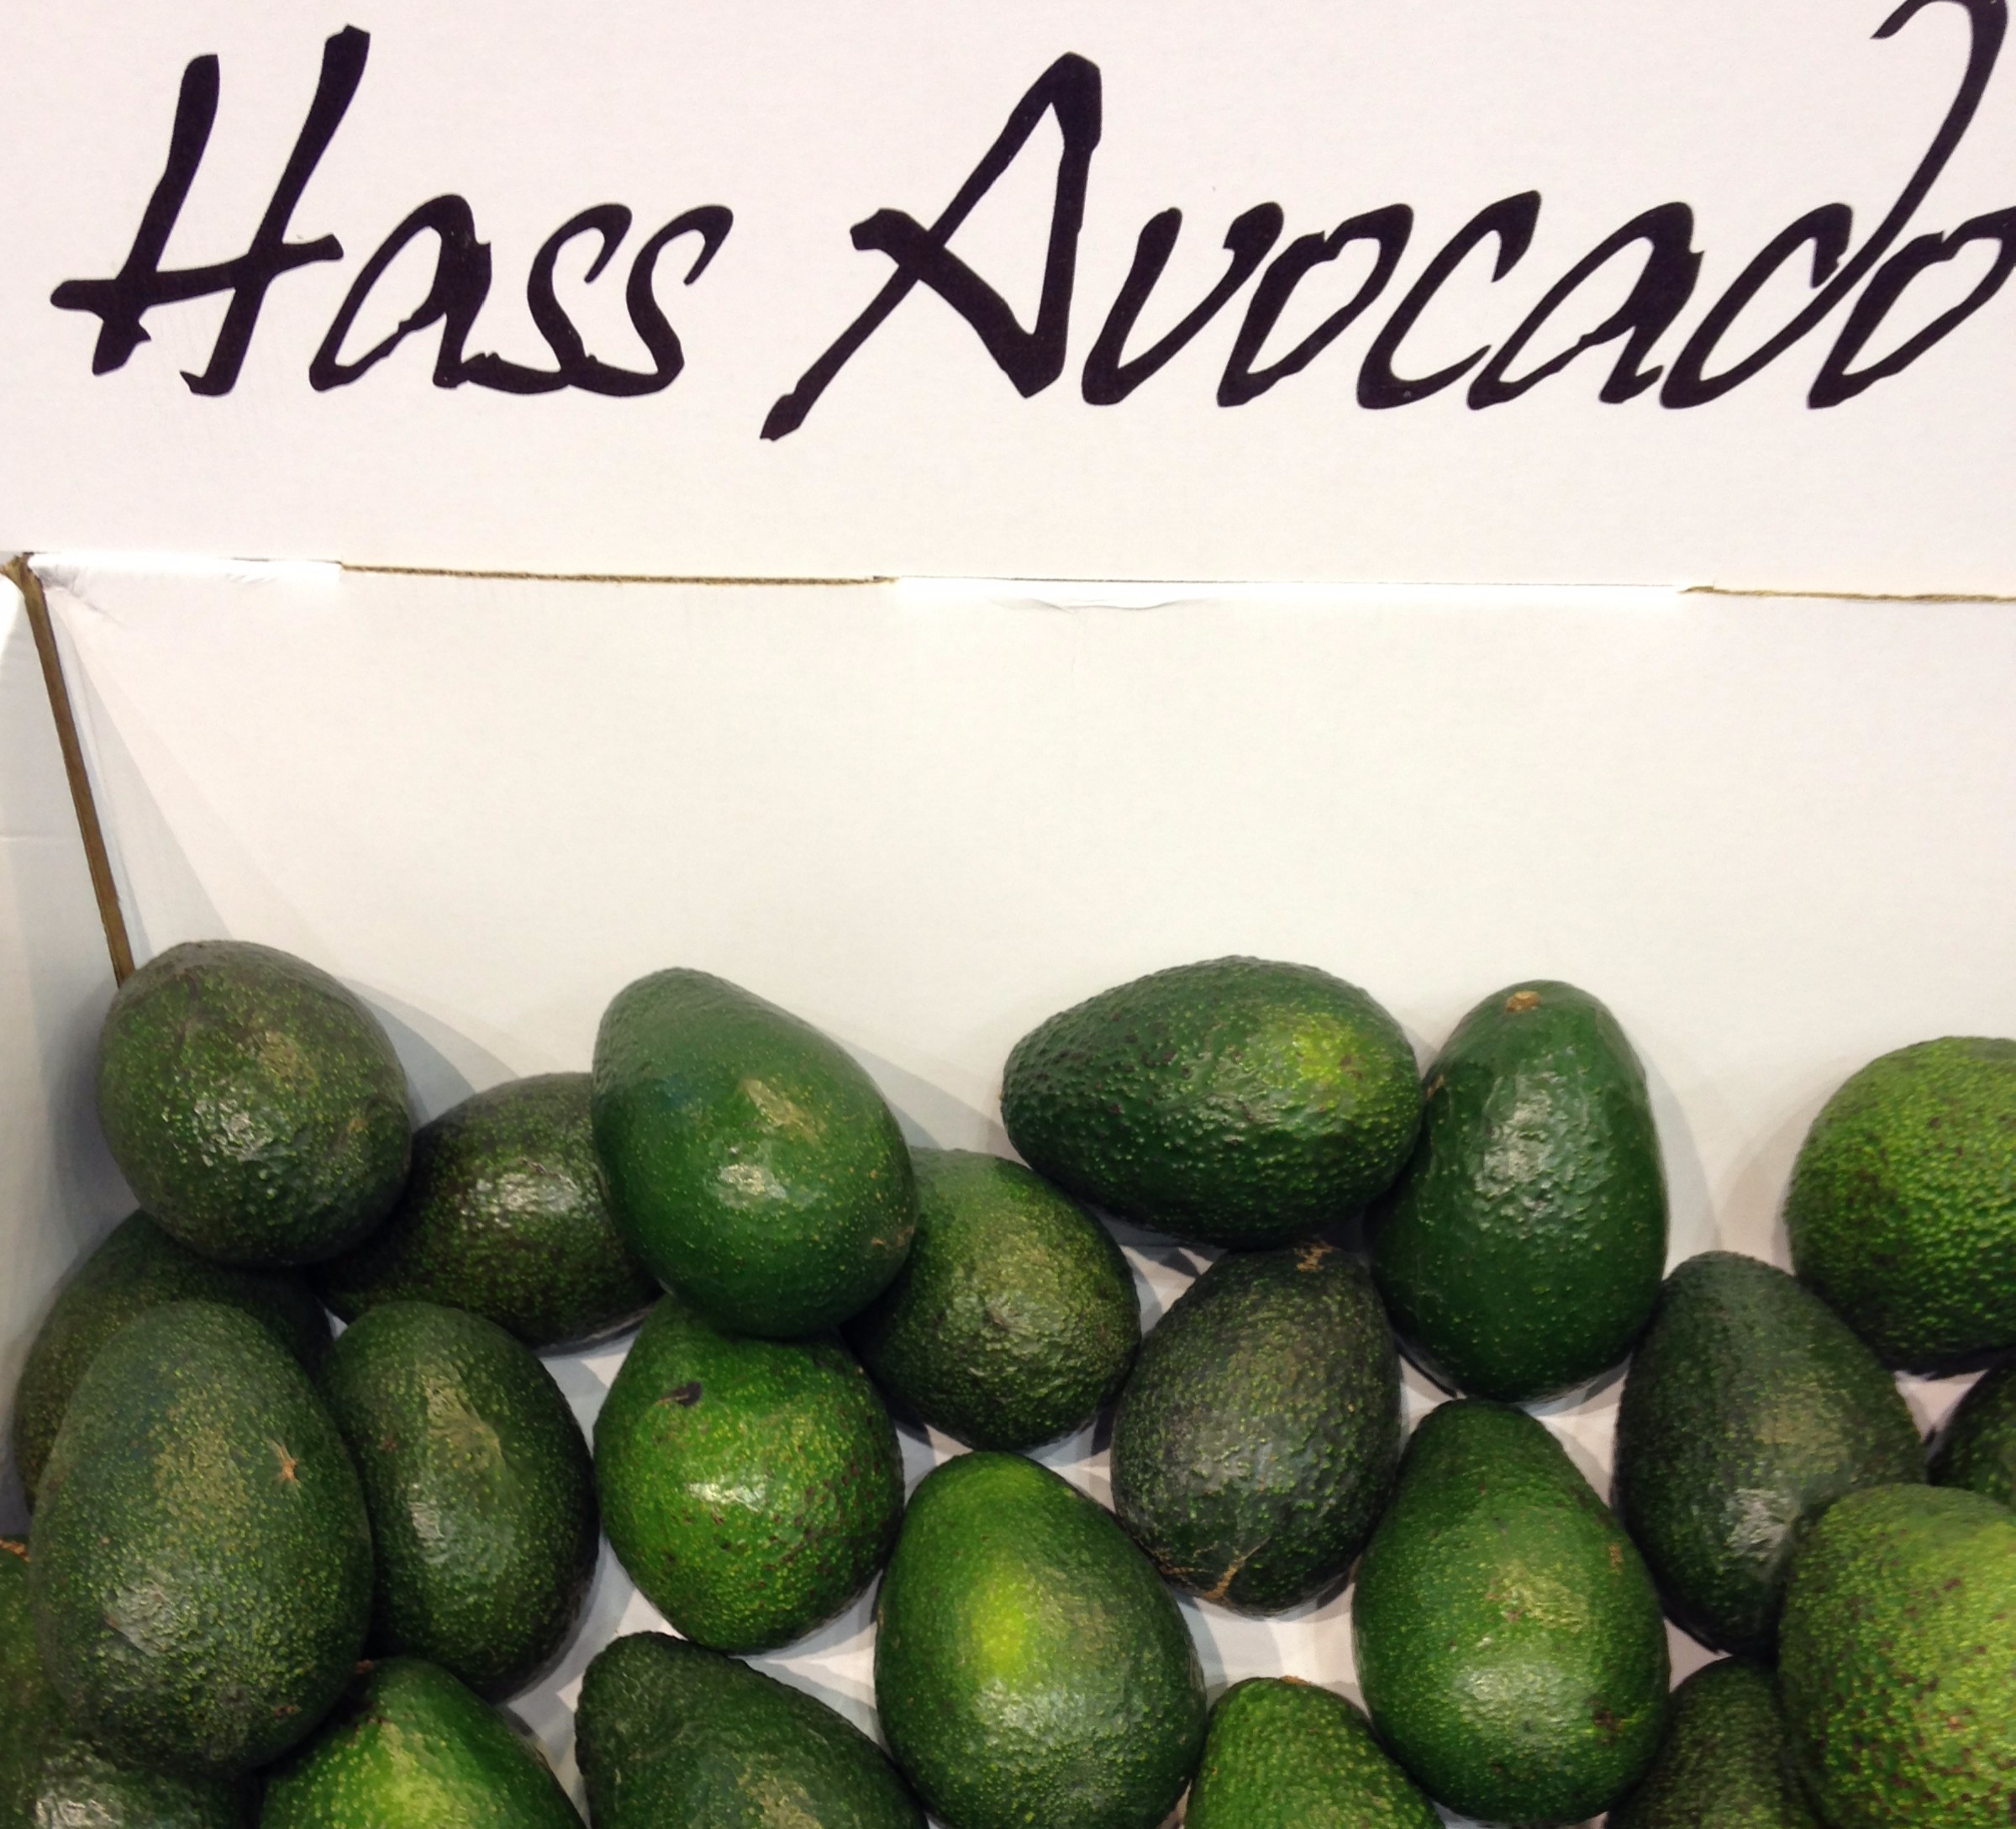 US avocado consumption has grown at an annual rate of 16% since 2008.